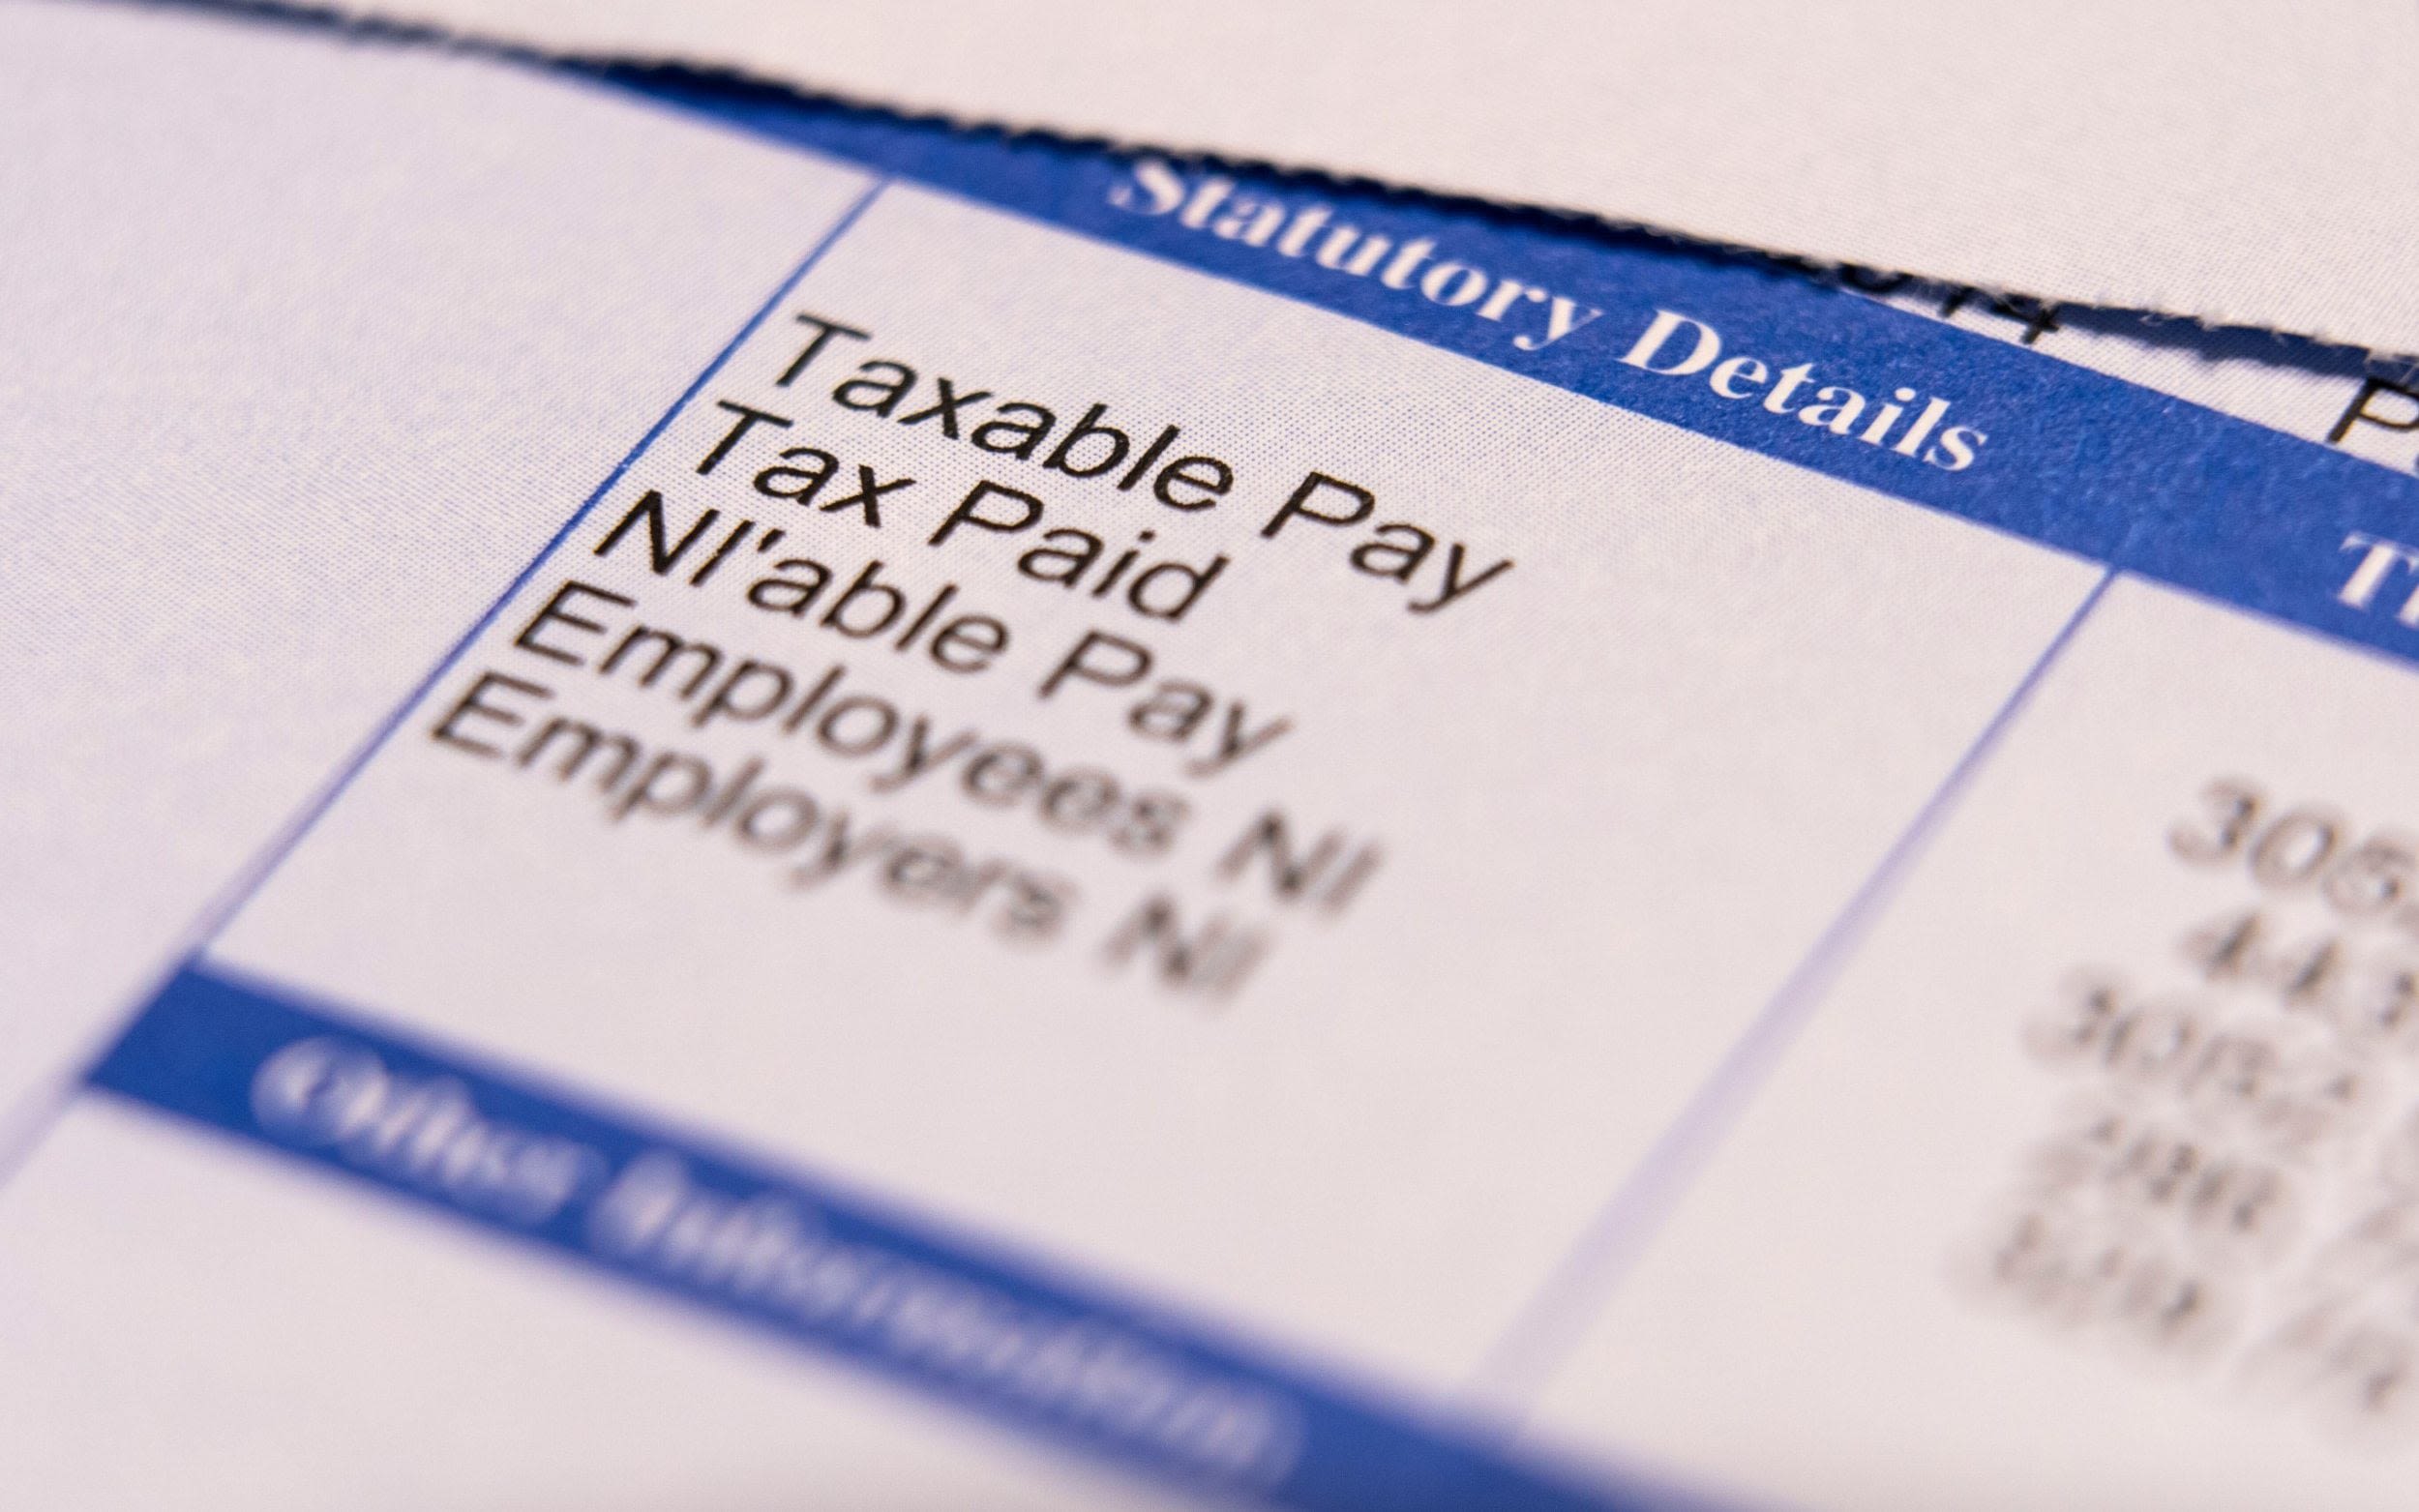 Take home pay calculator: Your salary after tax, pensions and other deductibles